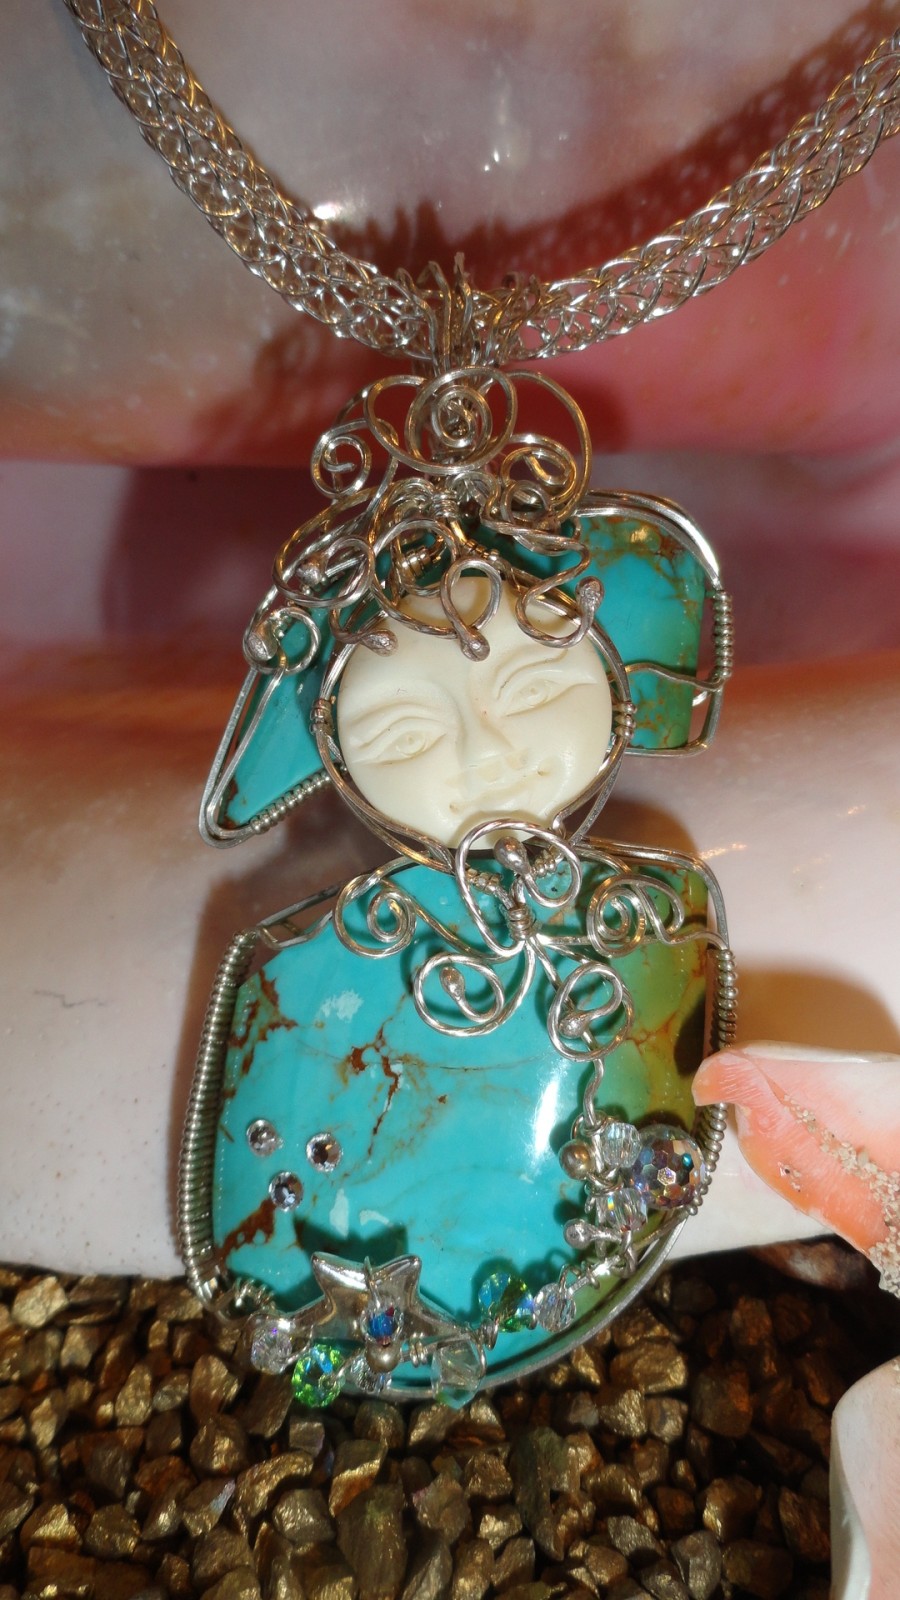 About Turquoise - Make Turquoise Jewelry | Jewelry Making ...